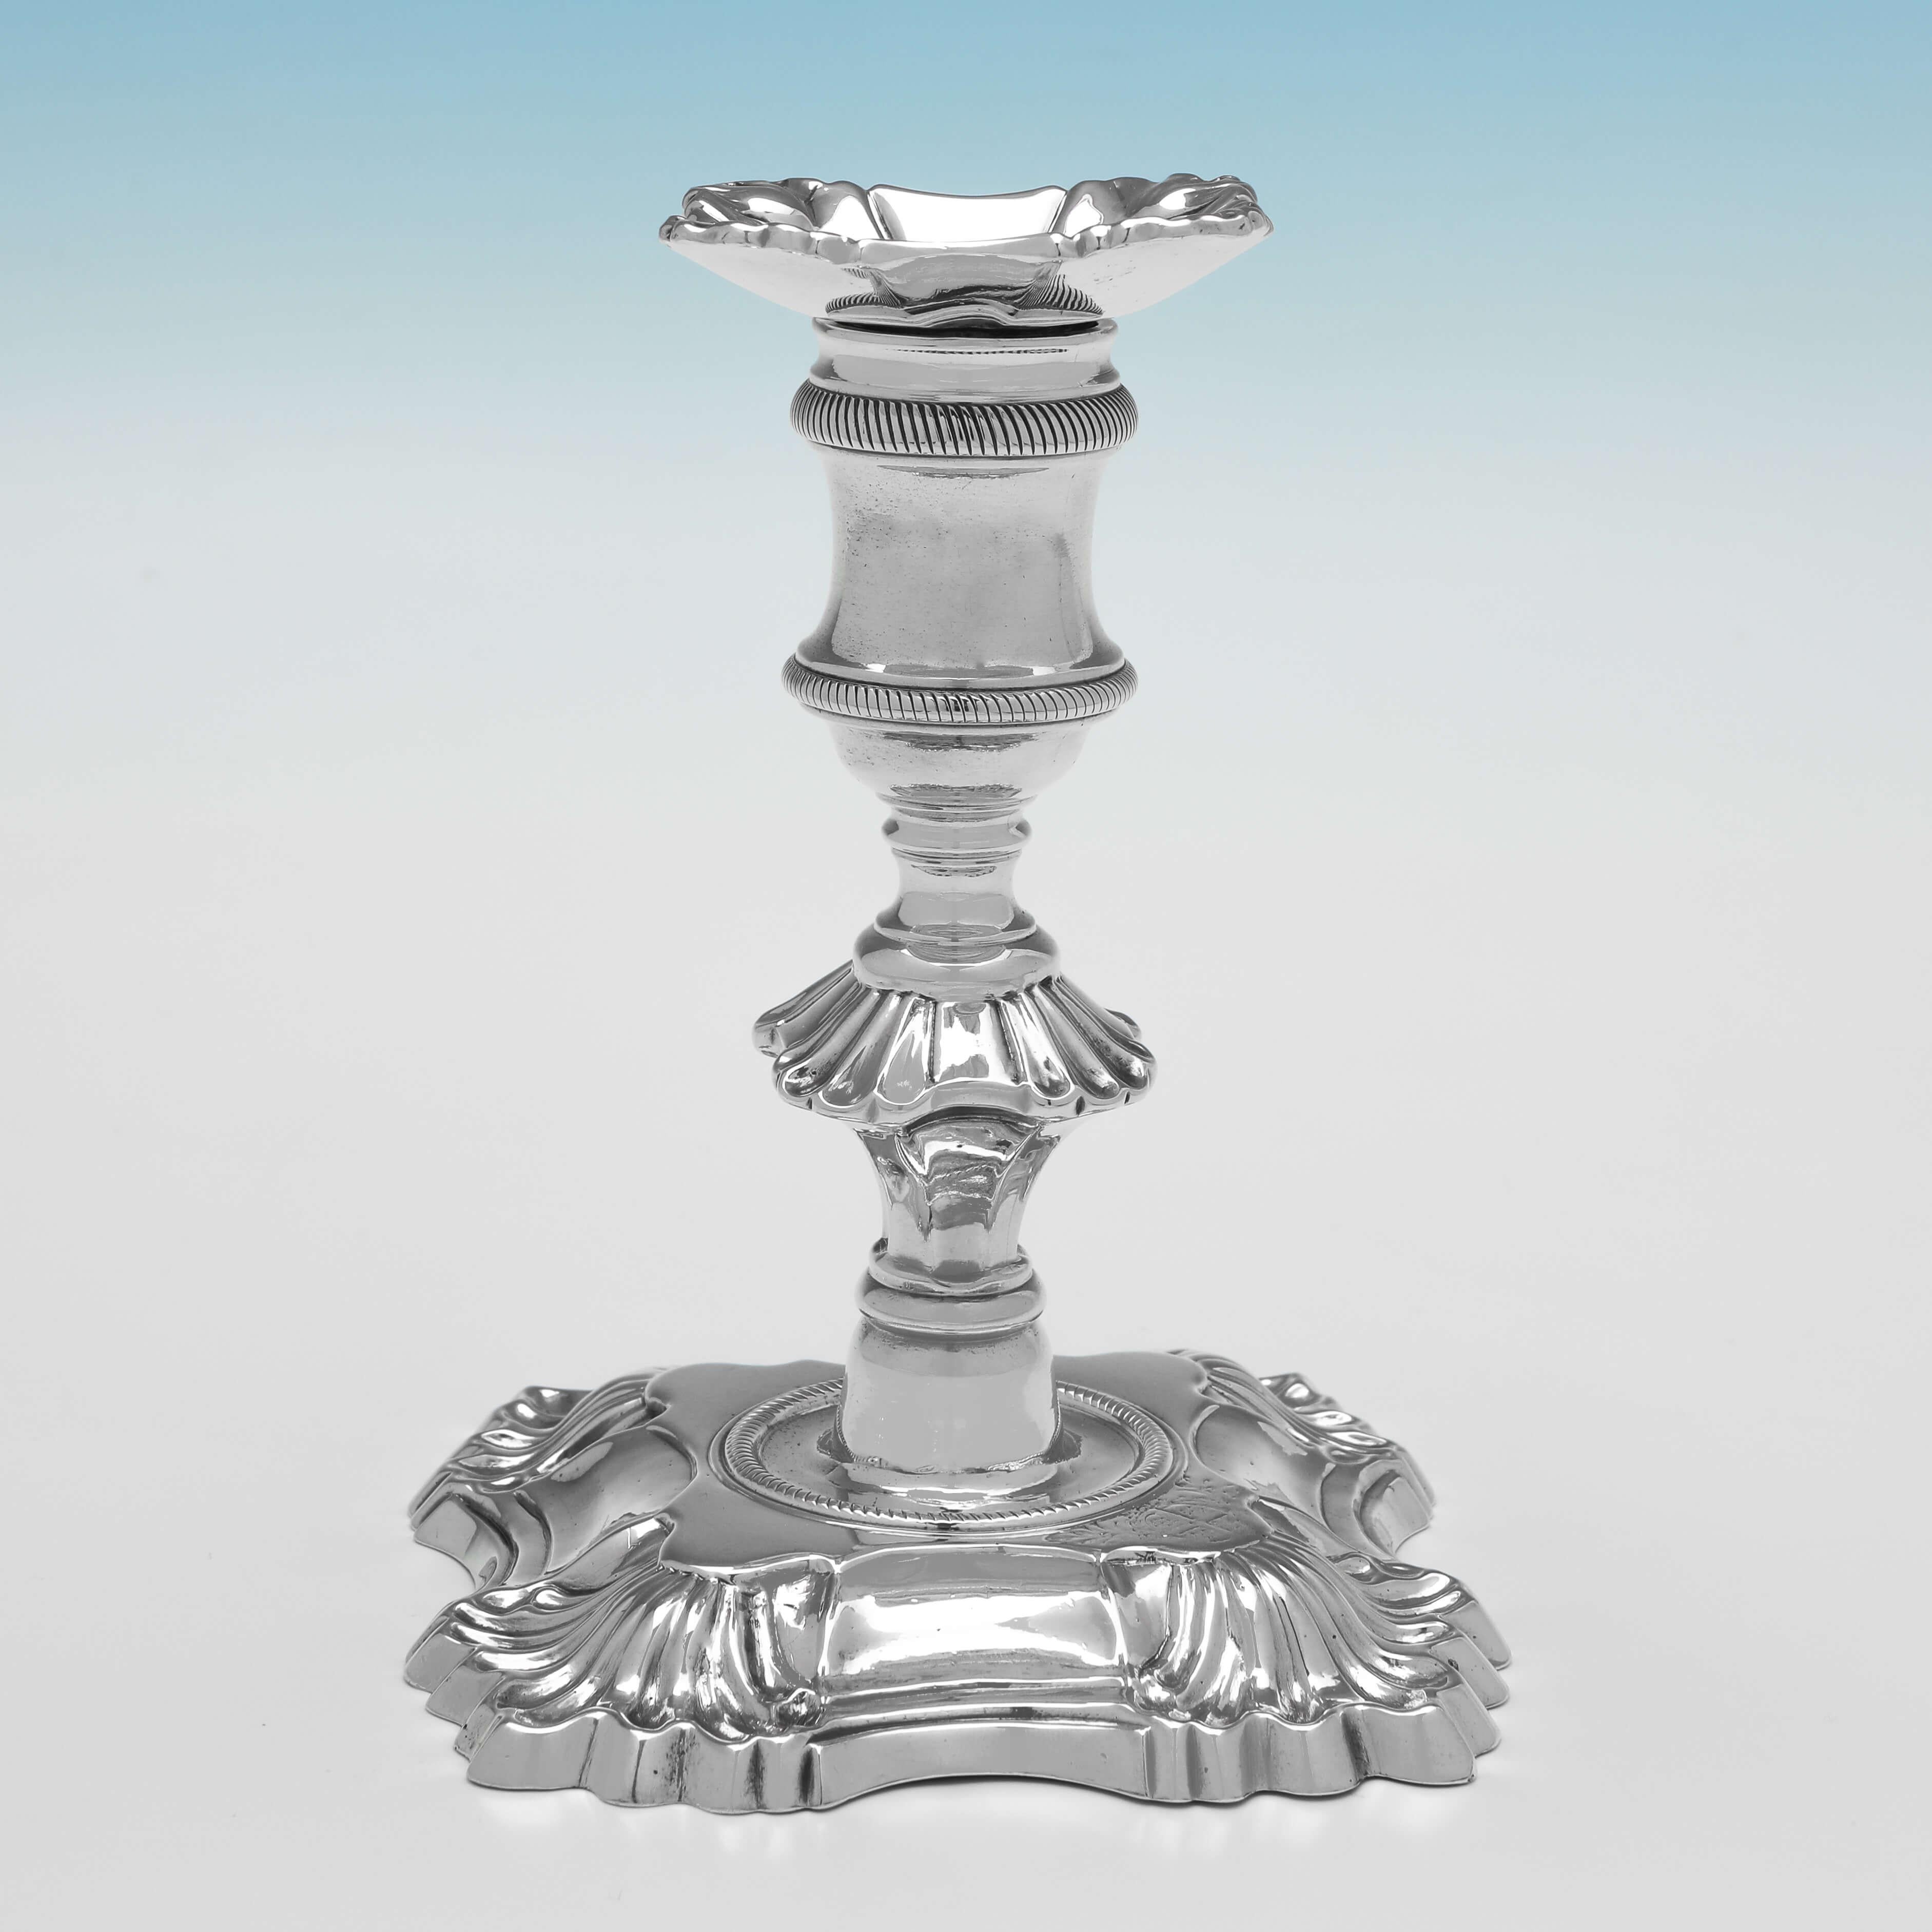 Hallmarked in London in 1756 by John Priest, this charming pair of George II period, Antique Sterling Silver Candlesticks, are in the 'Four Shell' design, and feature removable nozzles. 

Each candlestick measures 5.25